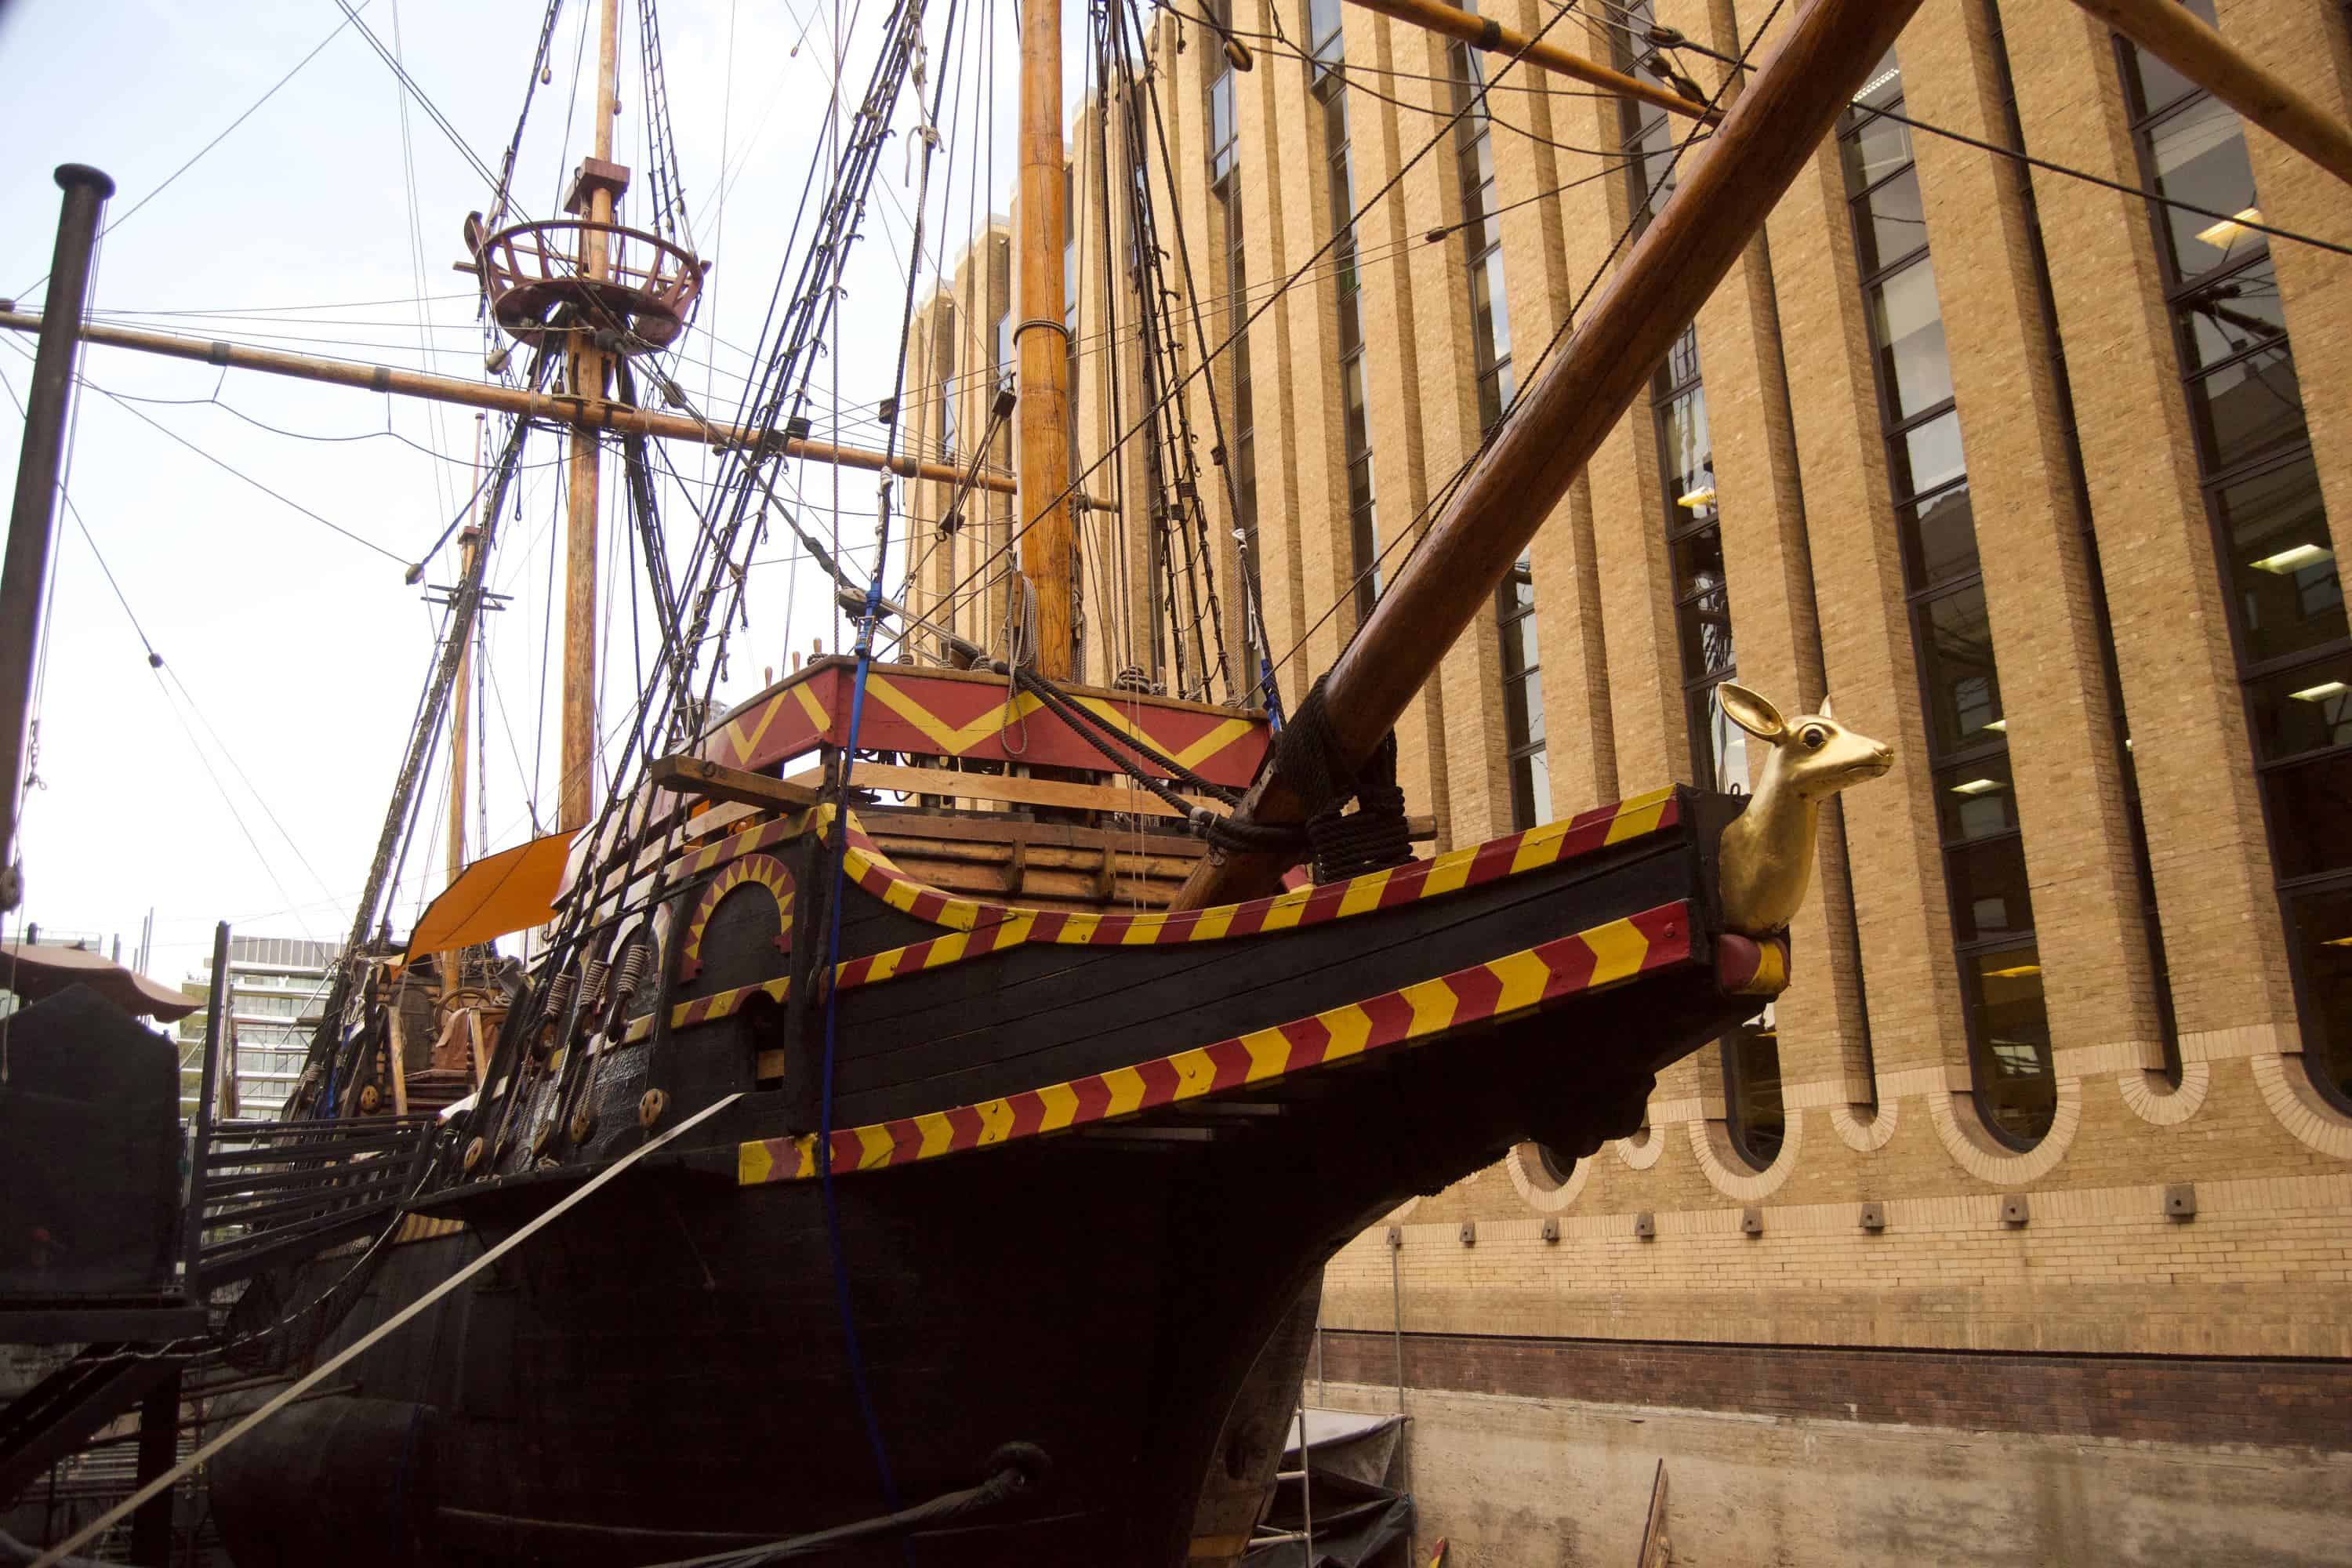 THE GOLDEN HINDE TURNS 50: Anniversary Celebrations